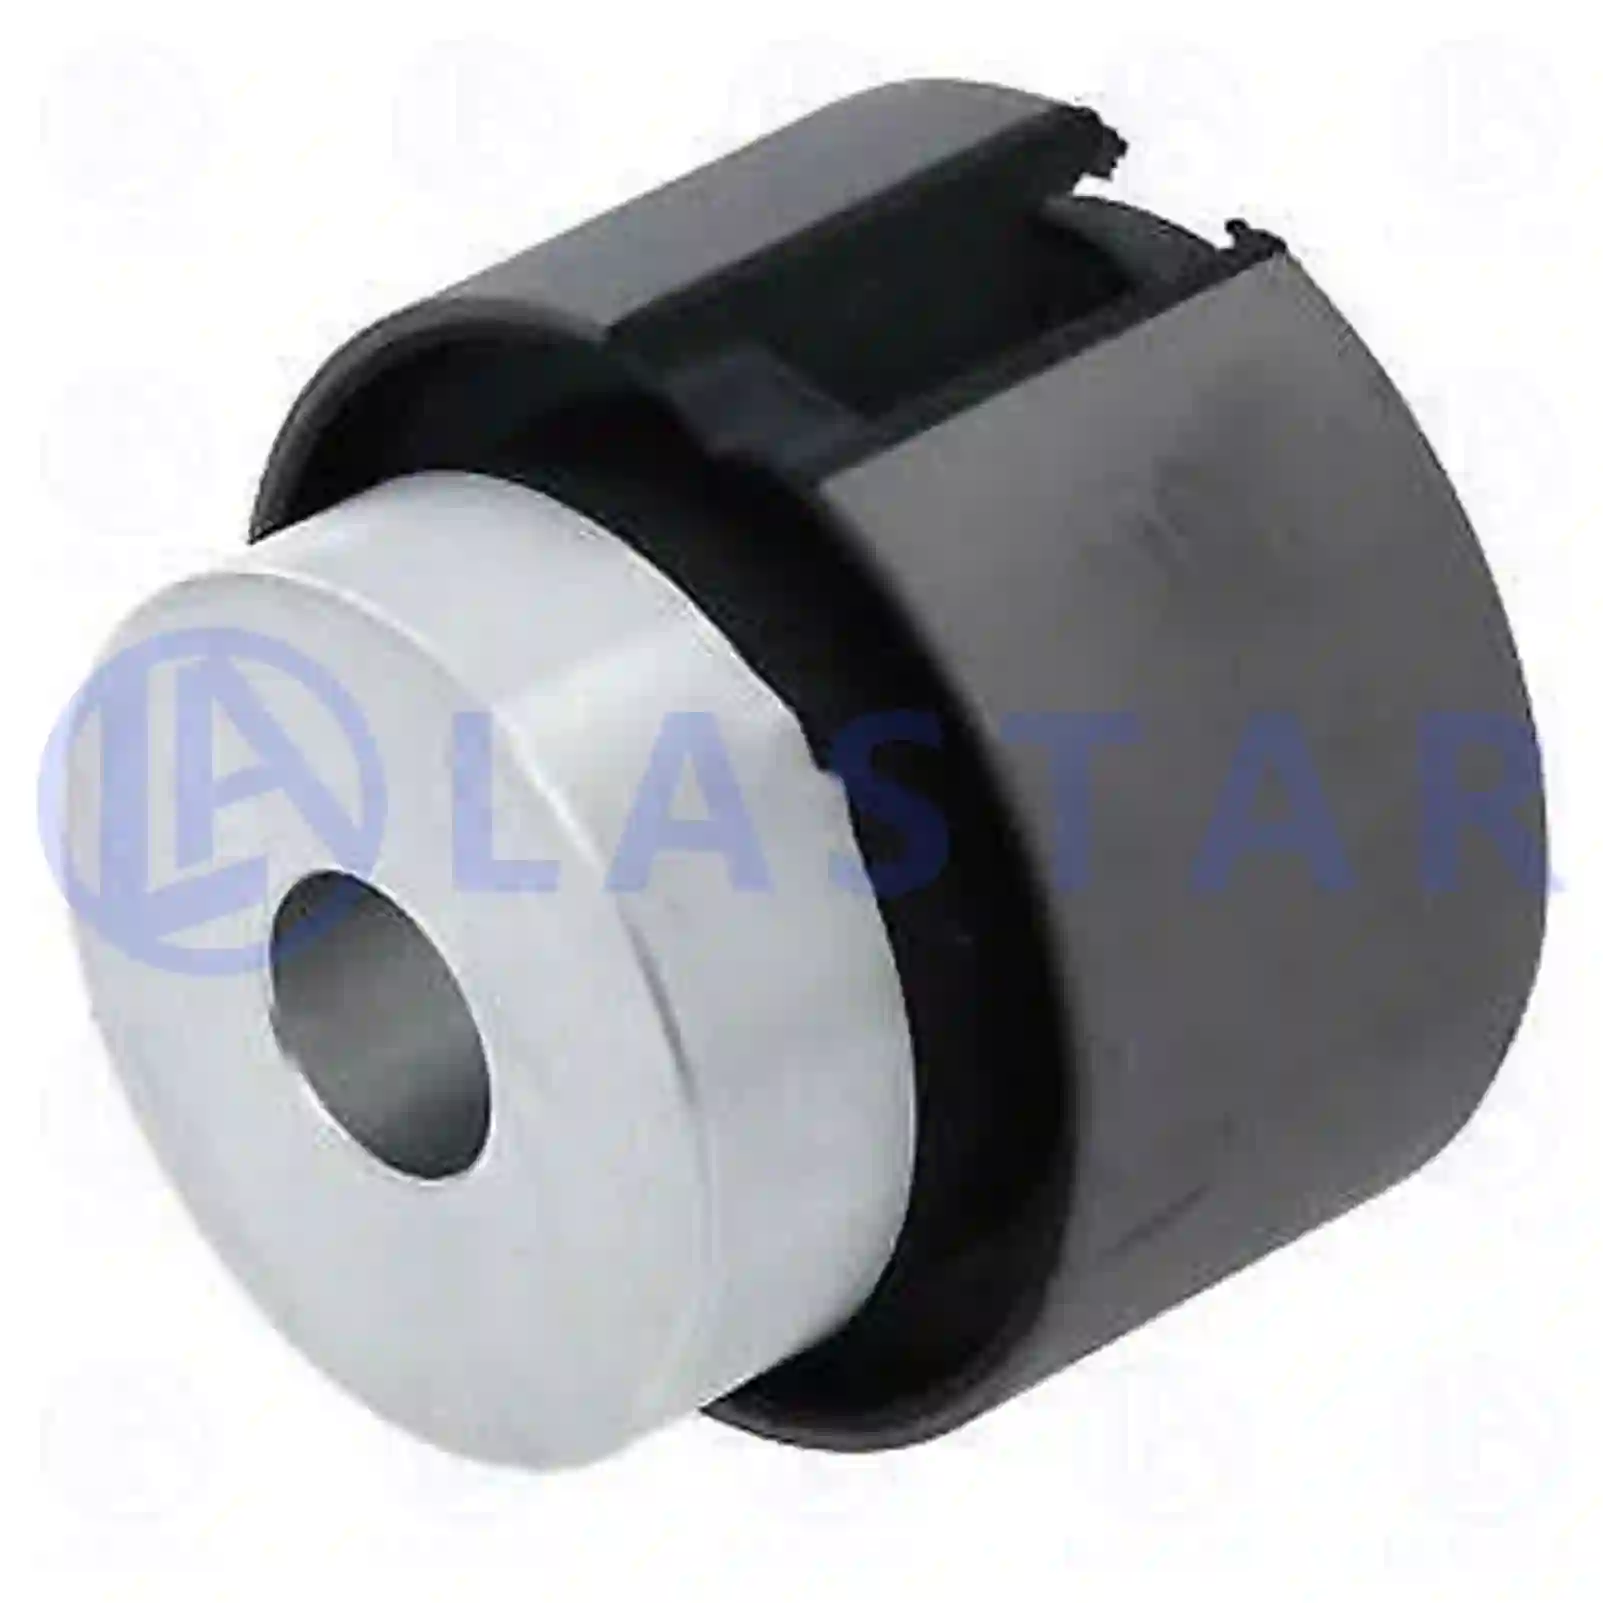 Bushing, coupling rod, 77728348, 9603233785, , ||  77728348 Lastar Spare Part | Truck Spare Parts, Auotomotive Spare Parts Bushing, coupling rod, 77728348, 9603233785, , ||  77728348 Lastar Spare Part | Truck Spare Parts, Auotomotive Spare Parts